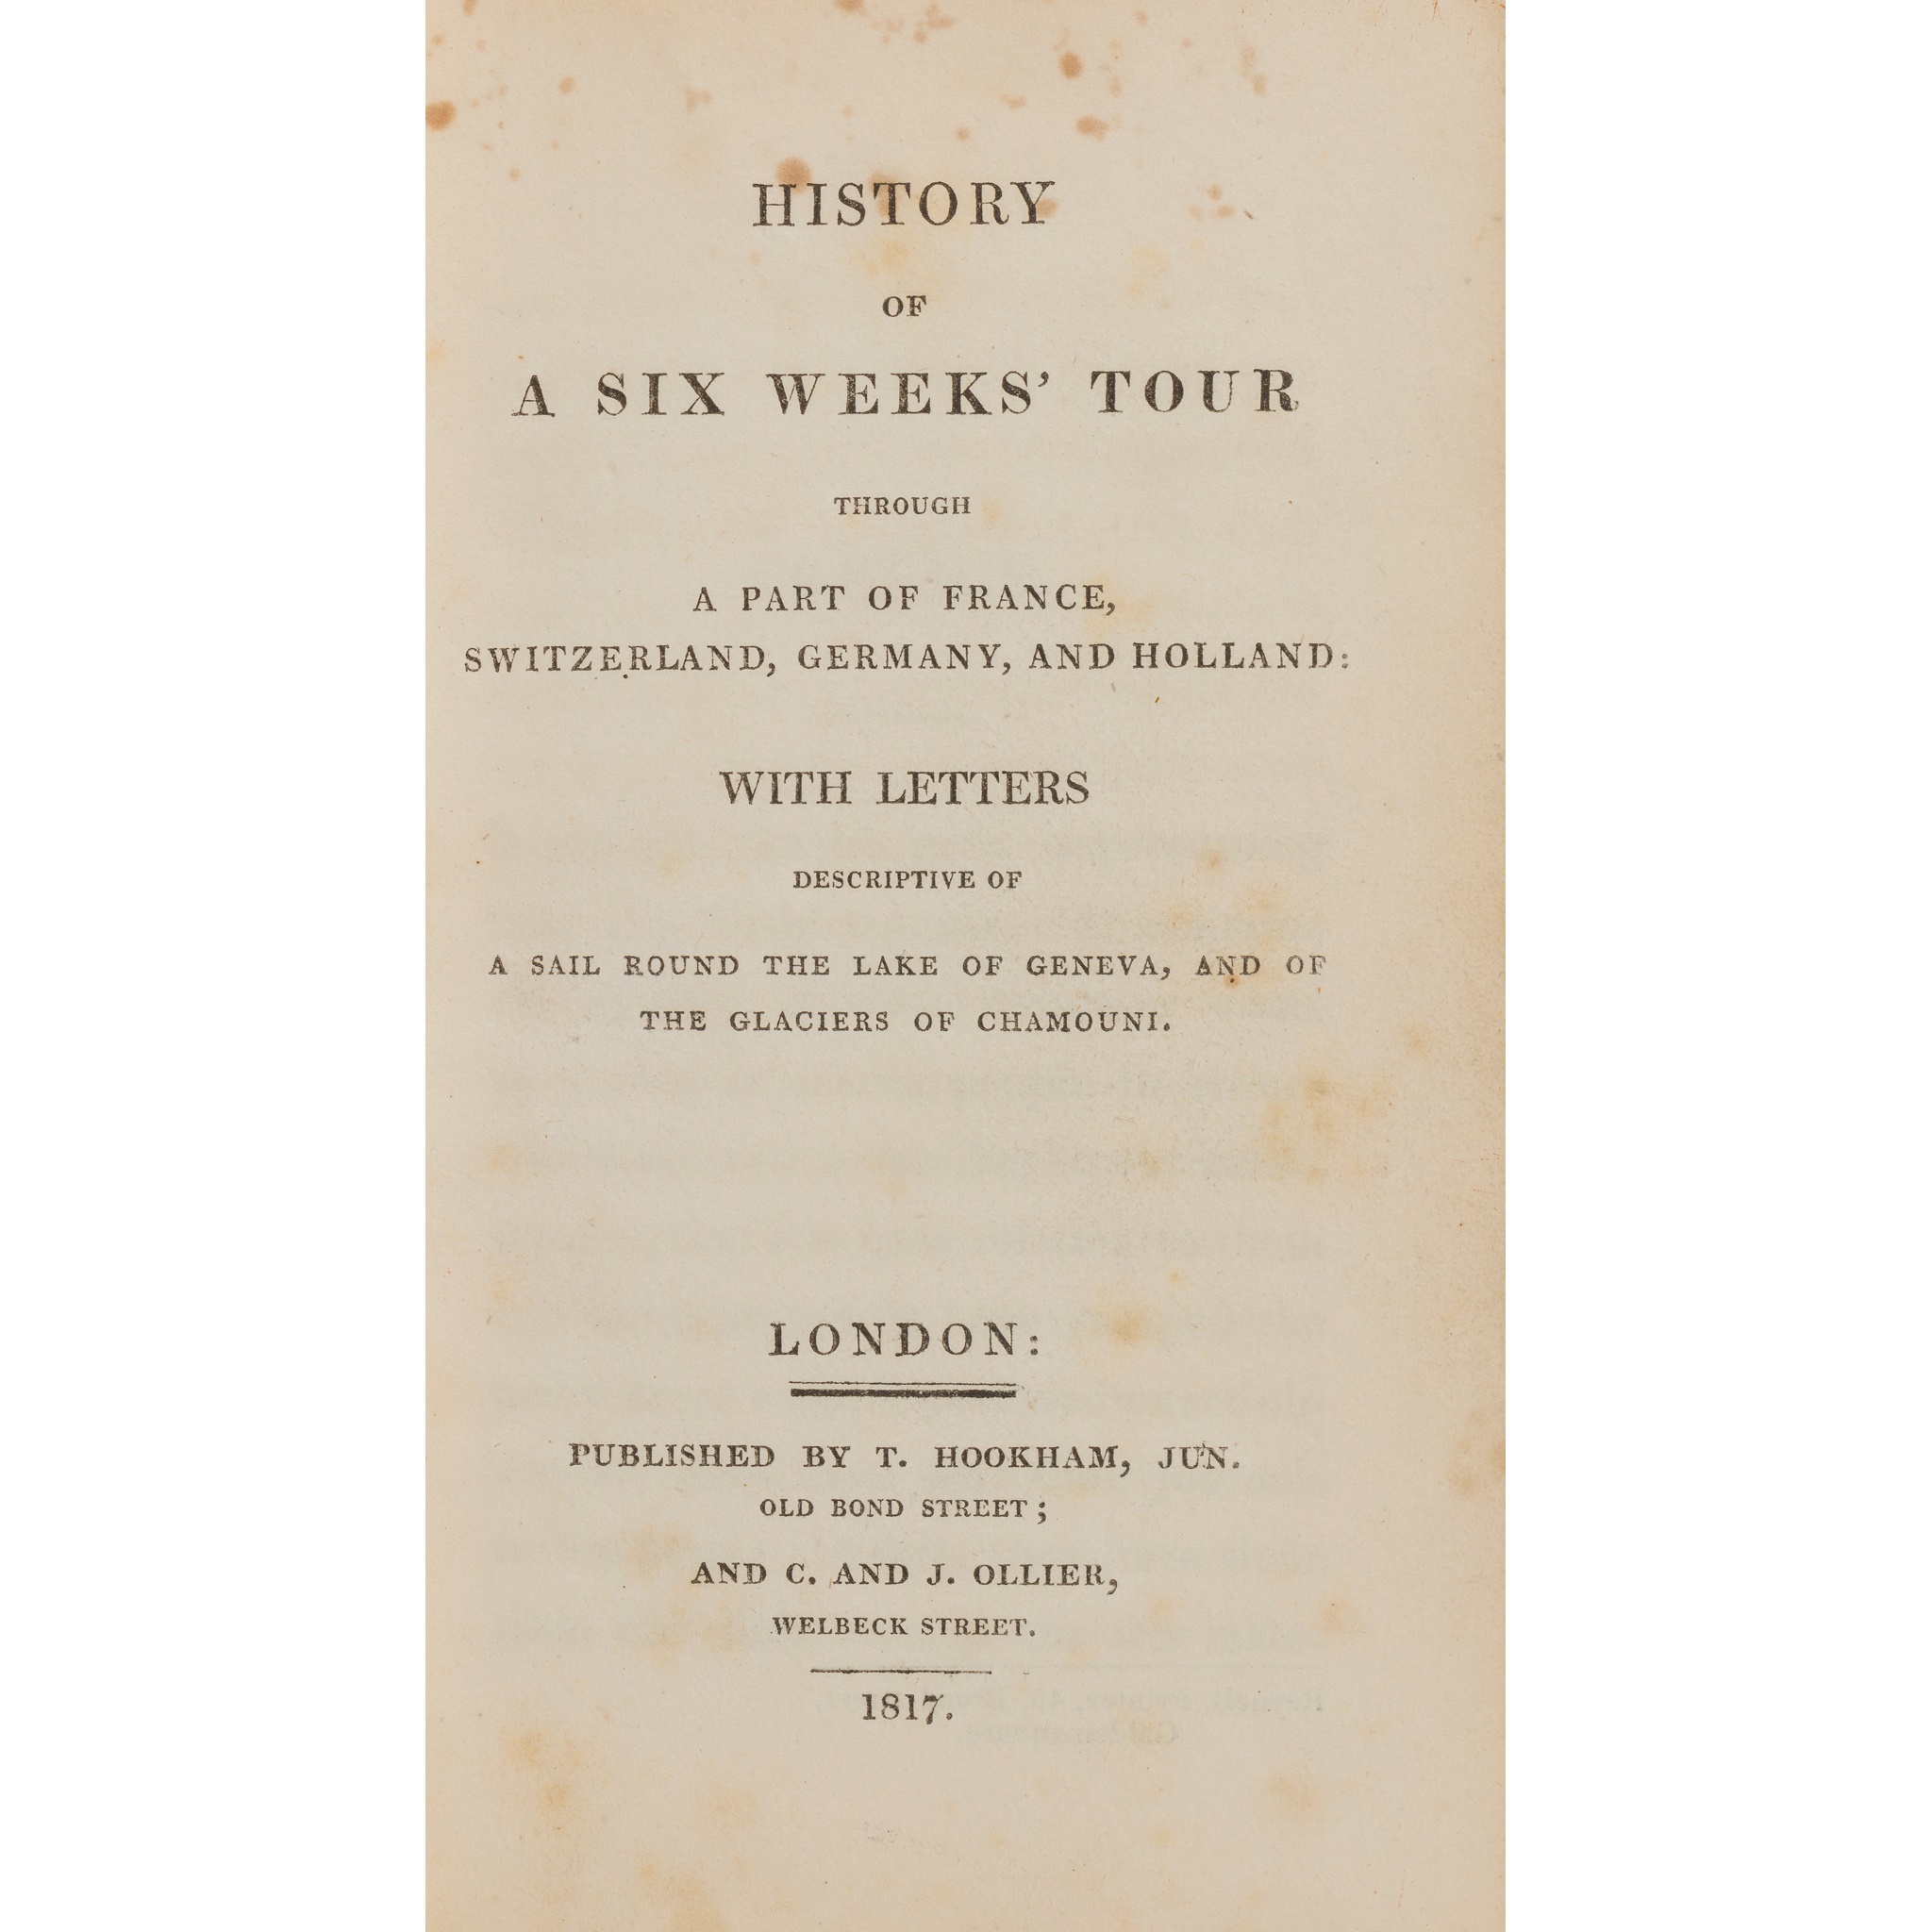 [Shelley, Mary] History of a Six Weeks' Tour through a part of France, Switzerland, Germany and